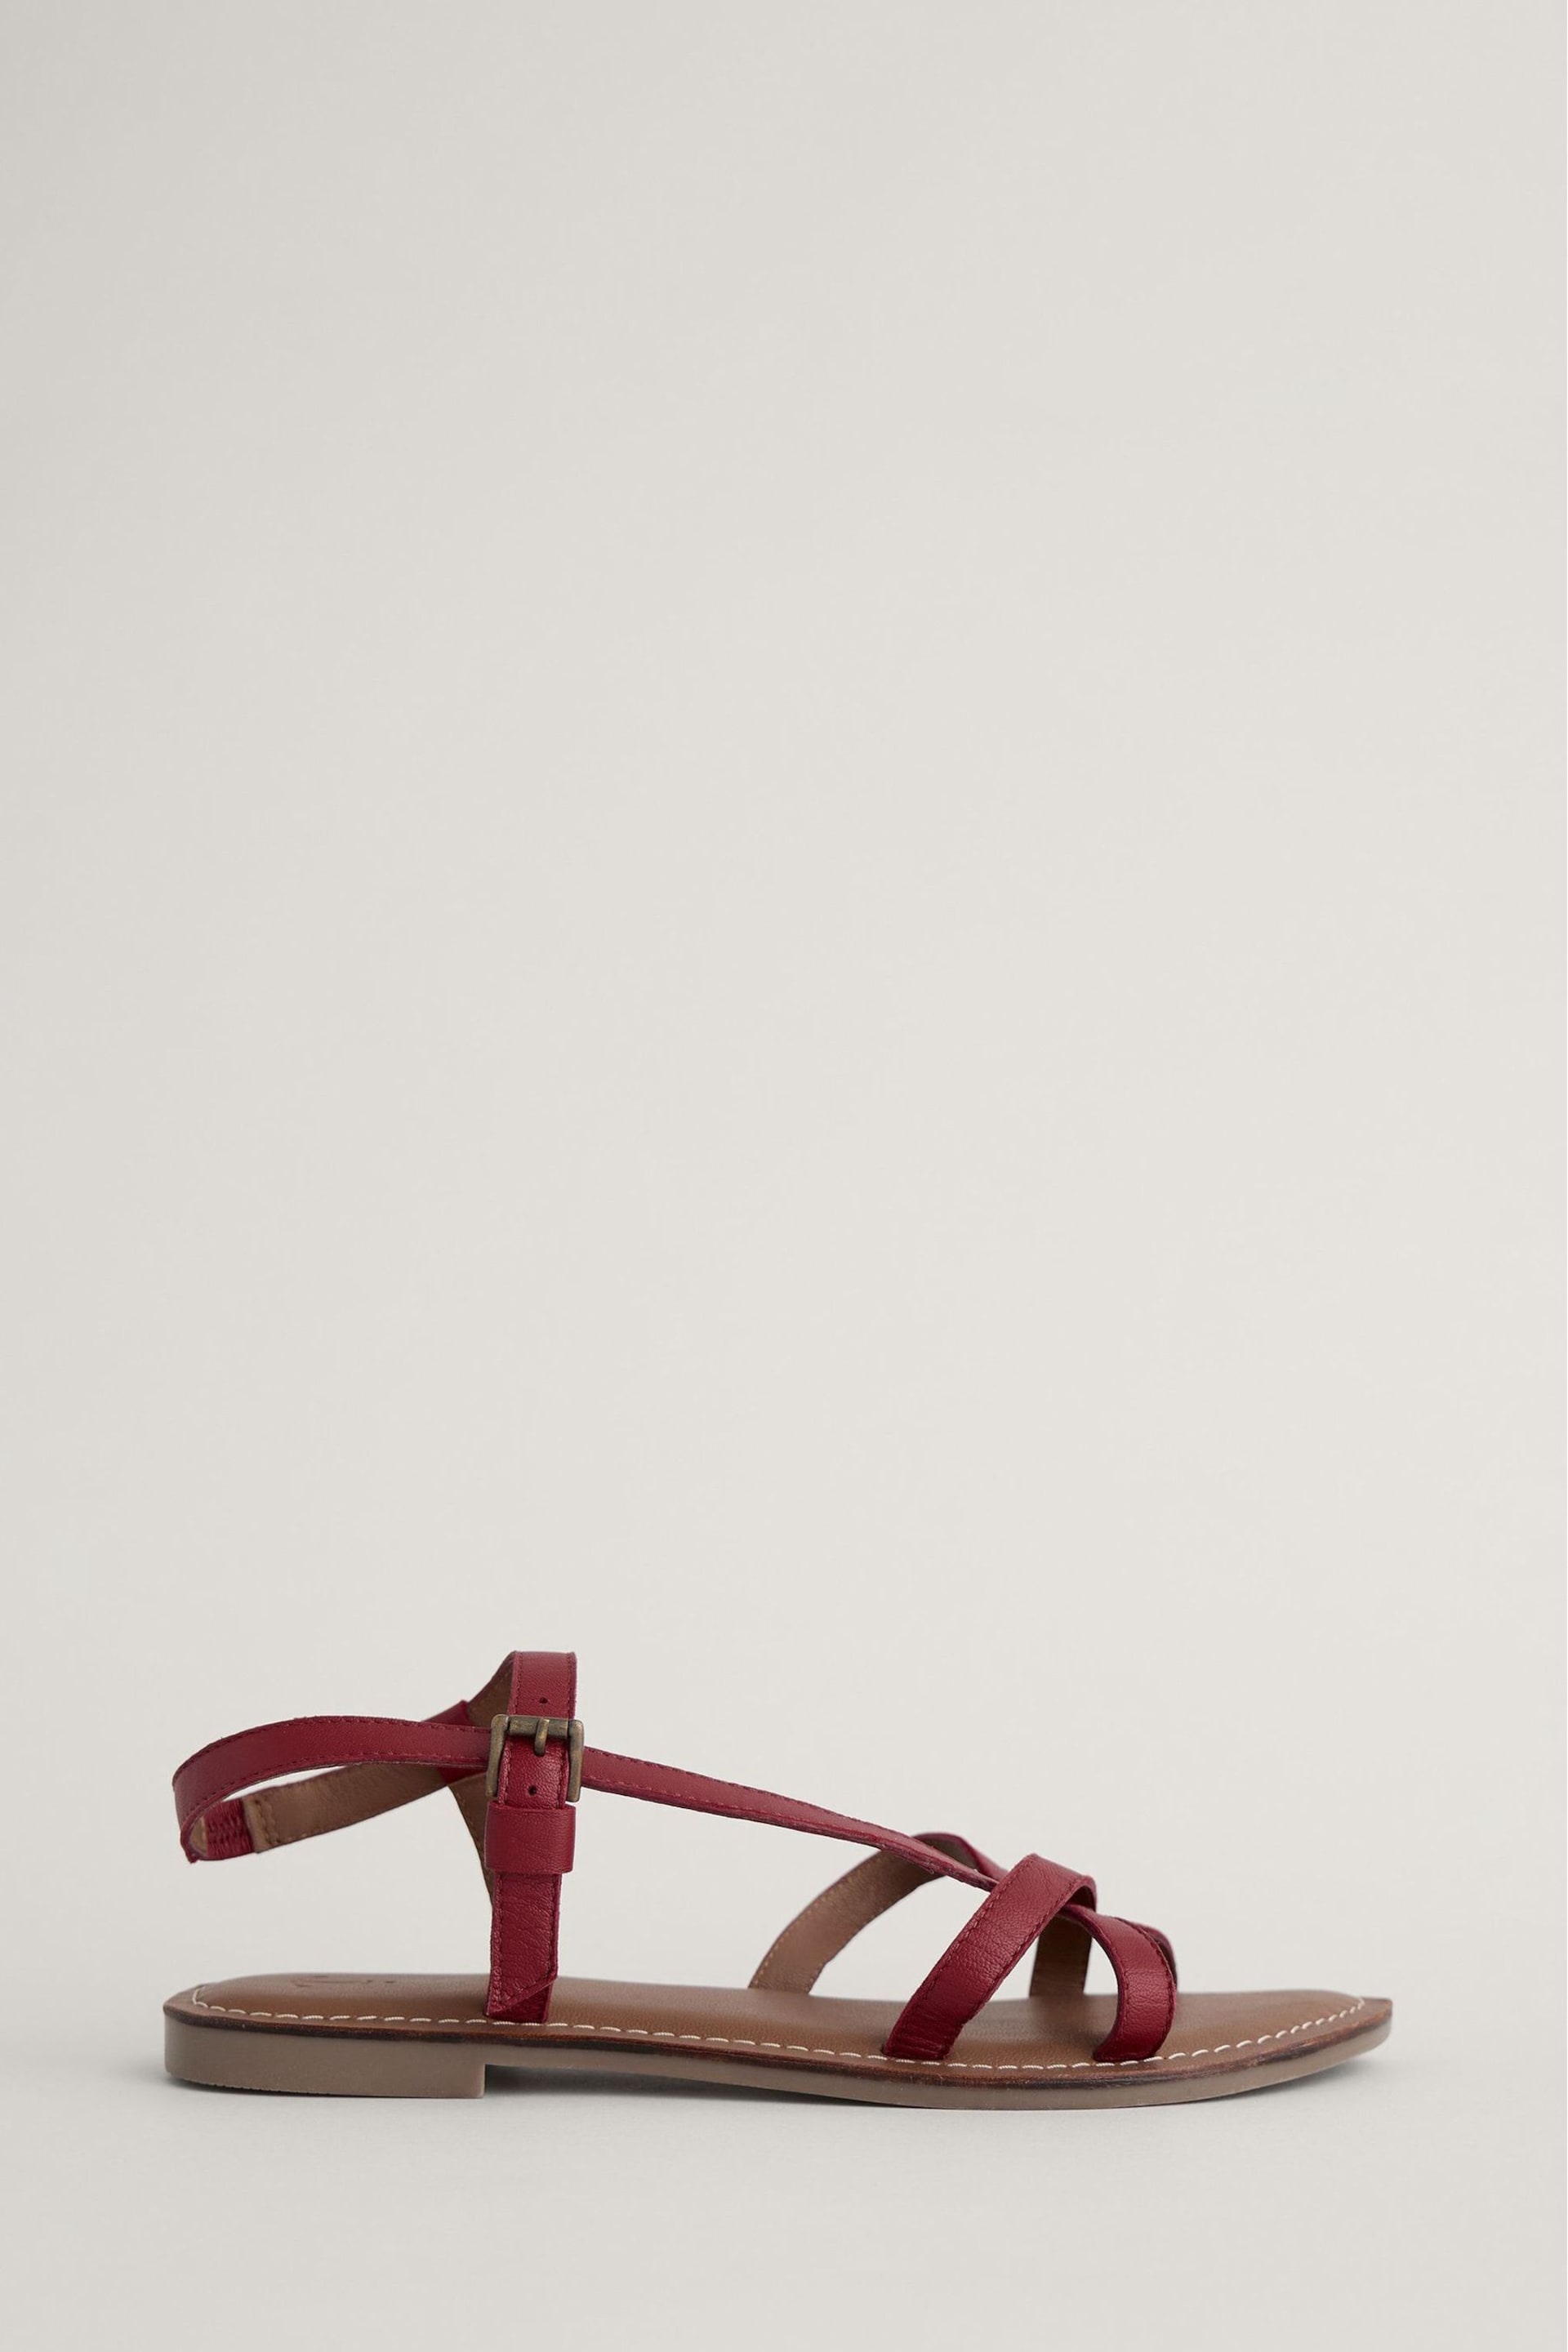 Seasalt Cornwall Red Sea Step Strappy Leather Sandals - Image 2 of 5